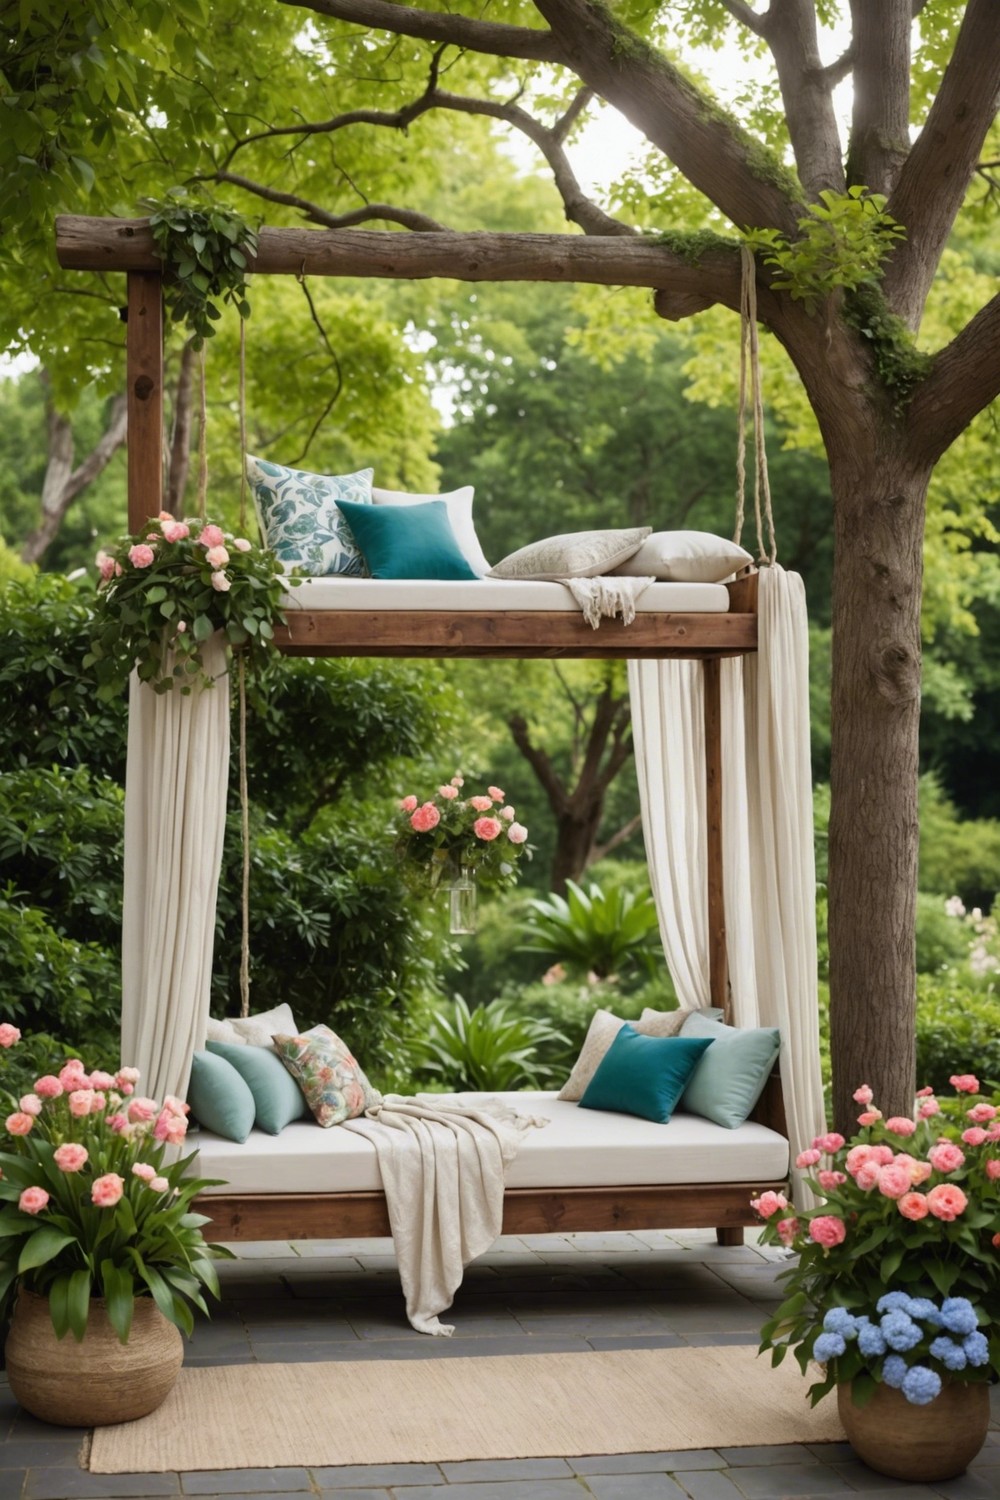 Hanging Daybeds for Ultimate Relaxation